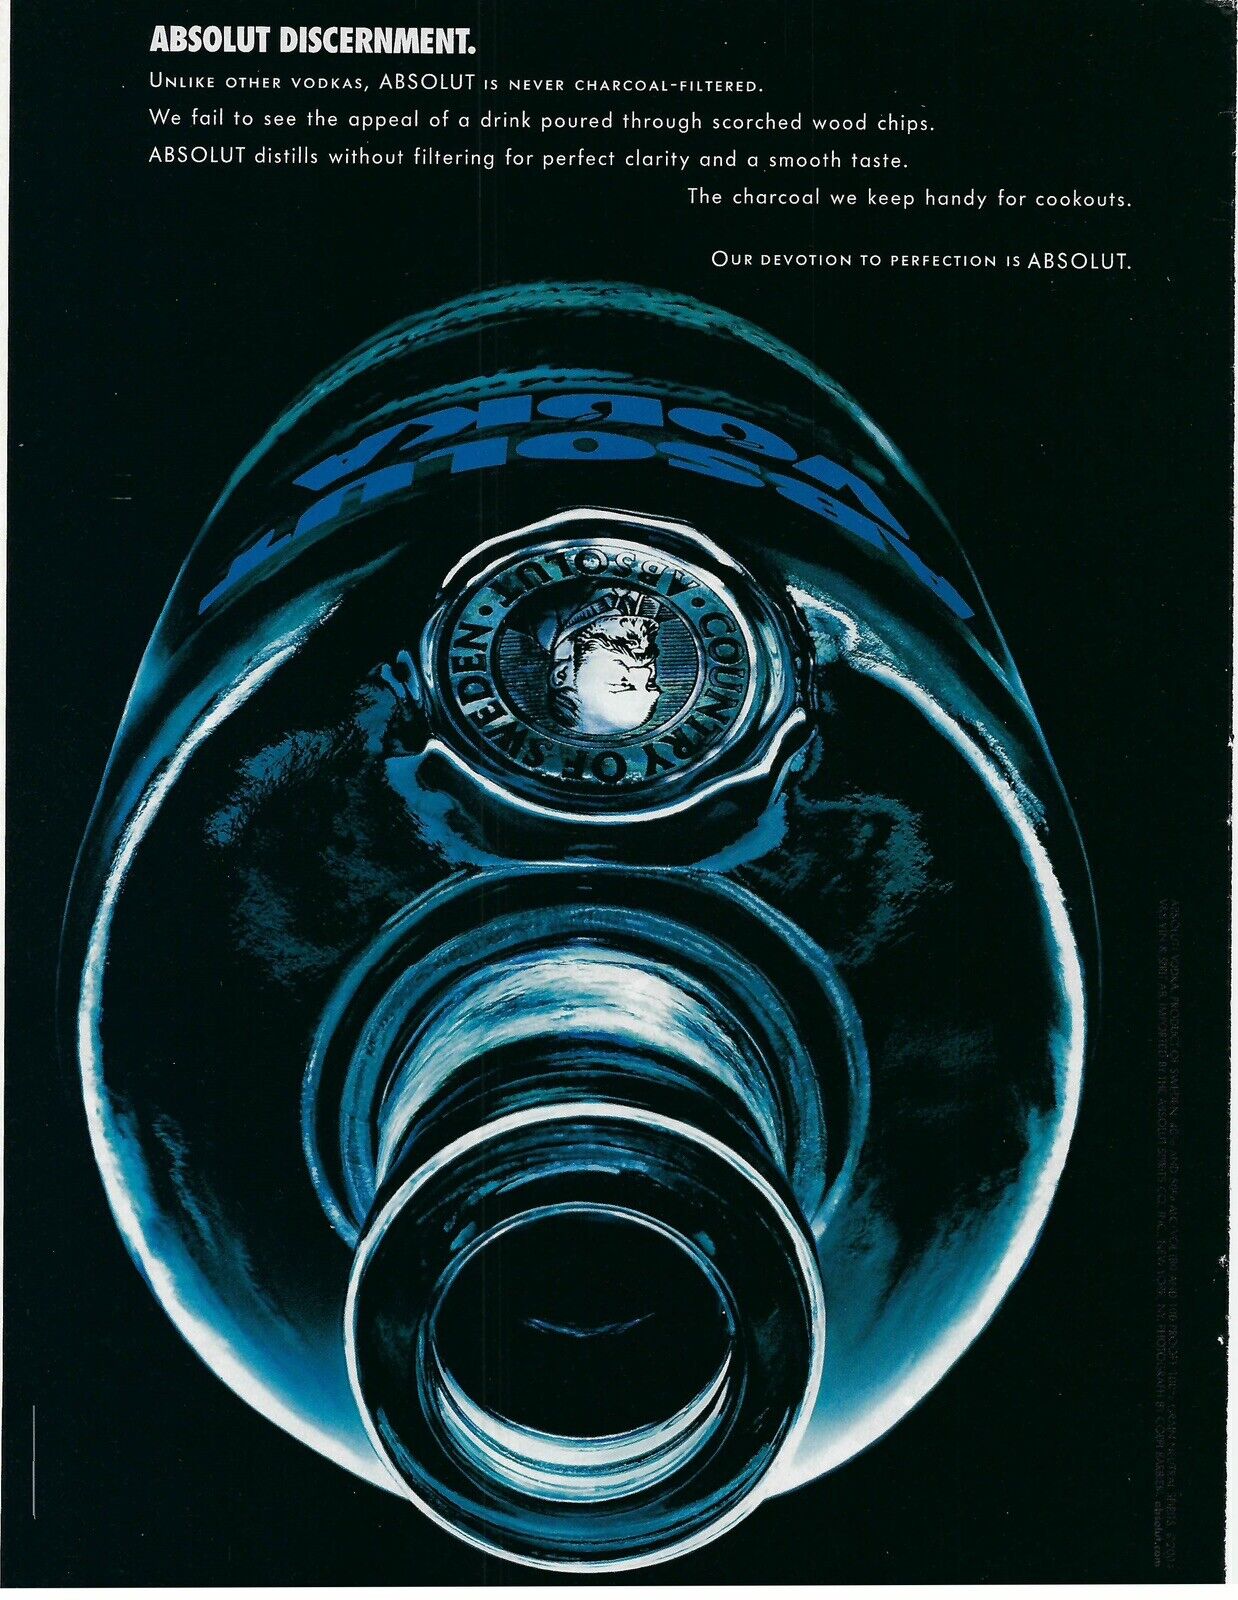 2004 Absolut Discernment Vodka Alcohol Never Charcoal-Filtered Print Ad/Poster